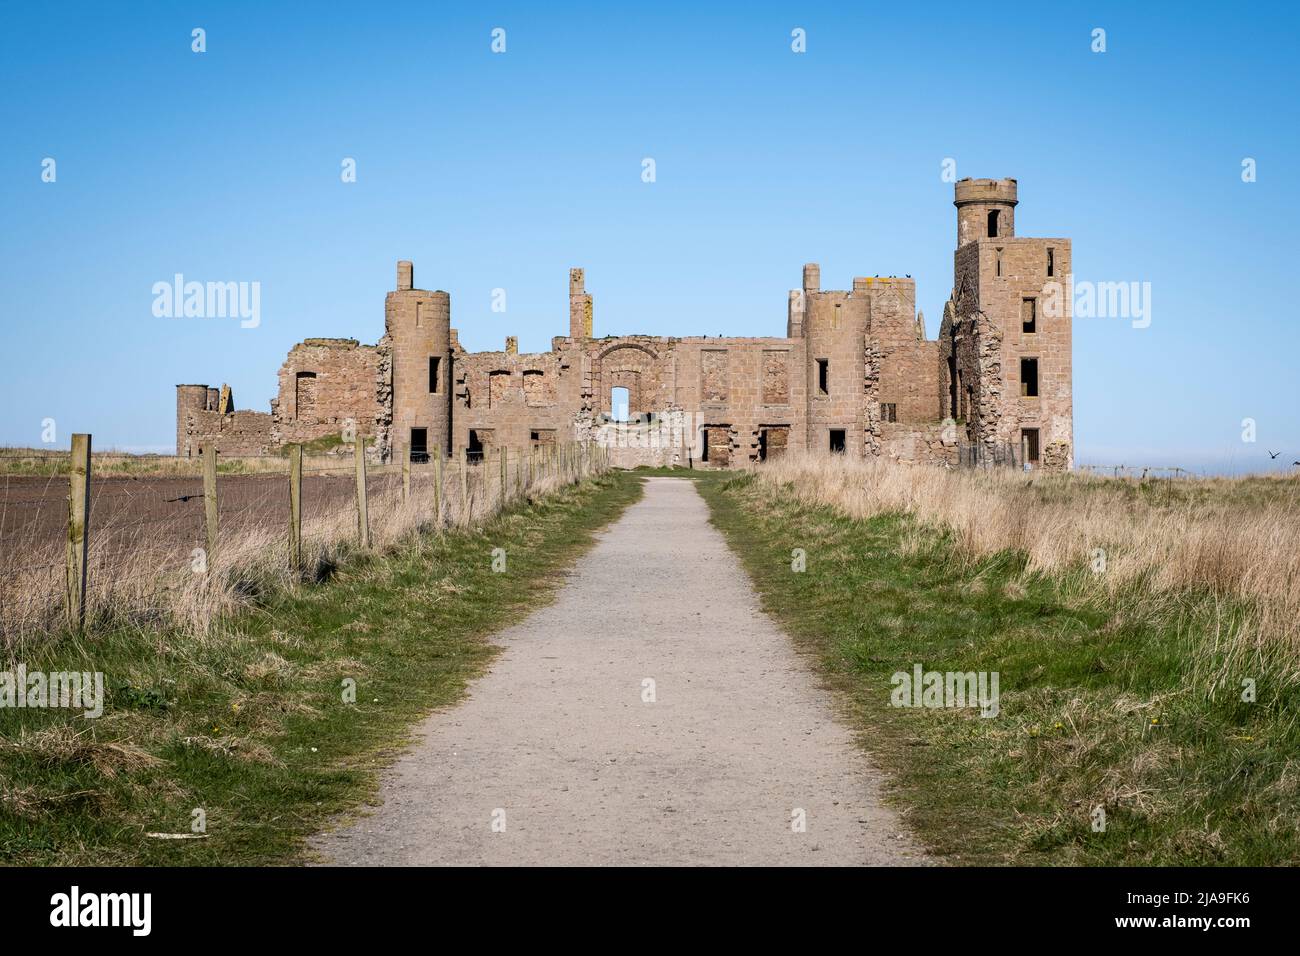 Slains Castle, also known as New Slains Castle to distinguish it from the nearby Old Slains Castle, is a ruined castle in Aberdeenshire, Scotland. Stock Photo